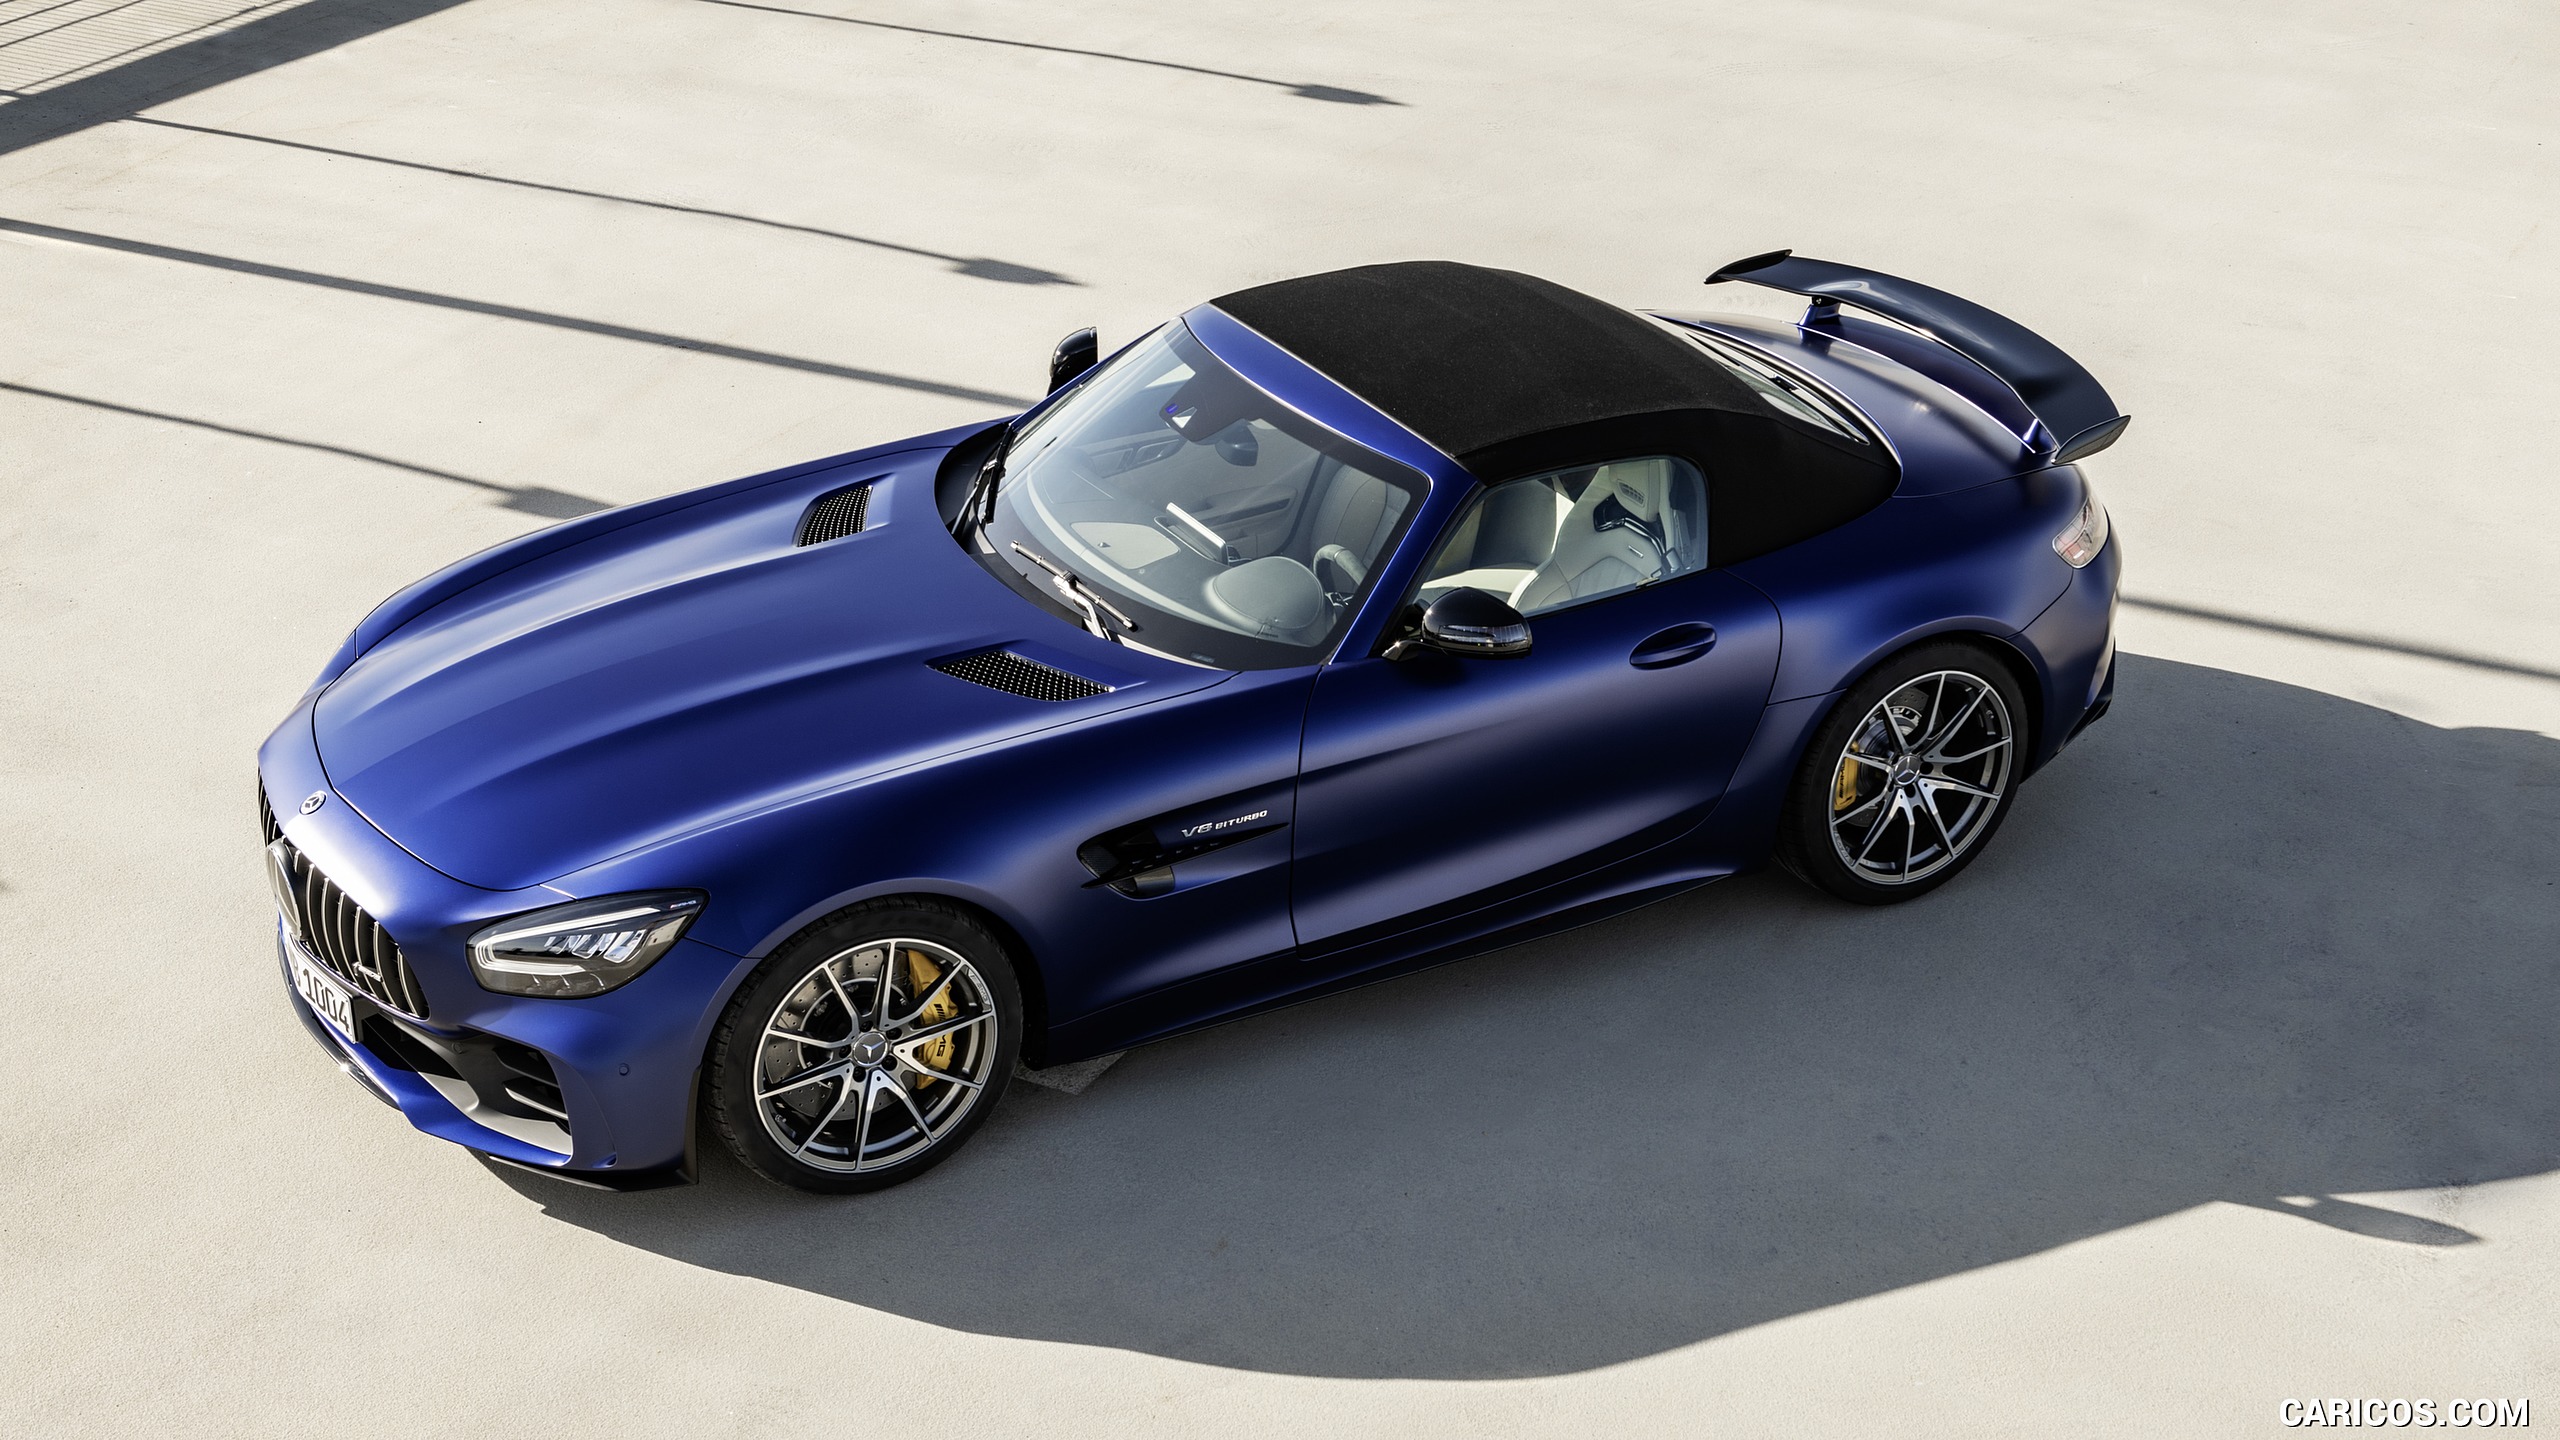 2020 Mercedes-AMG GT R Roadster - Front Three-Quarter, #8 of 246